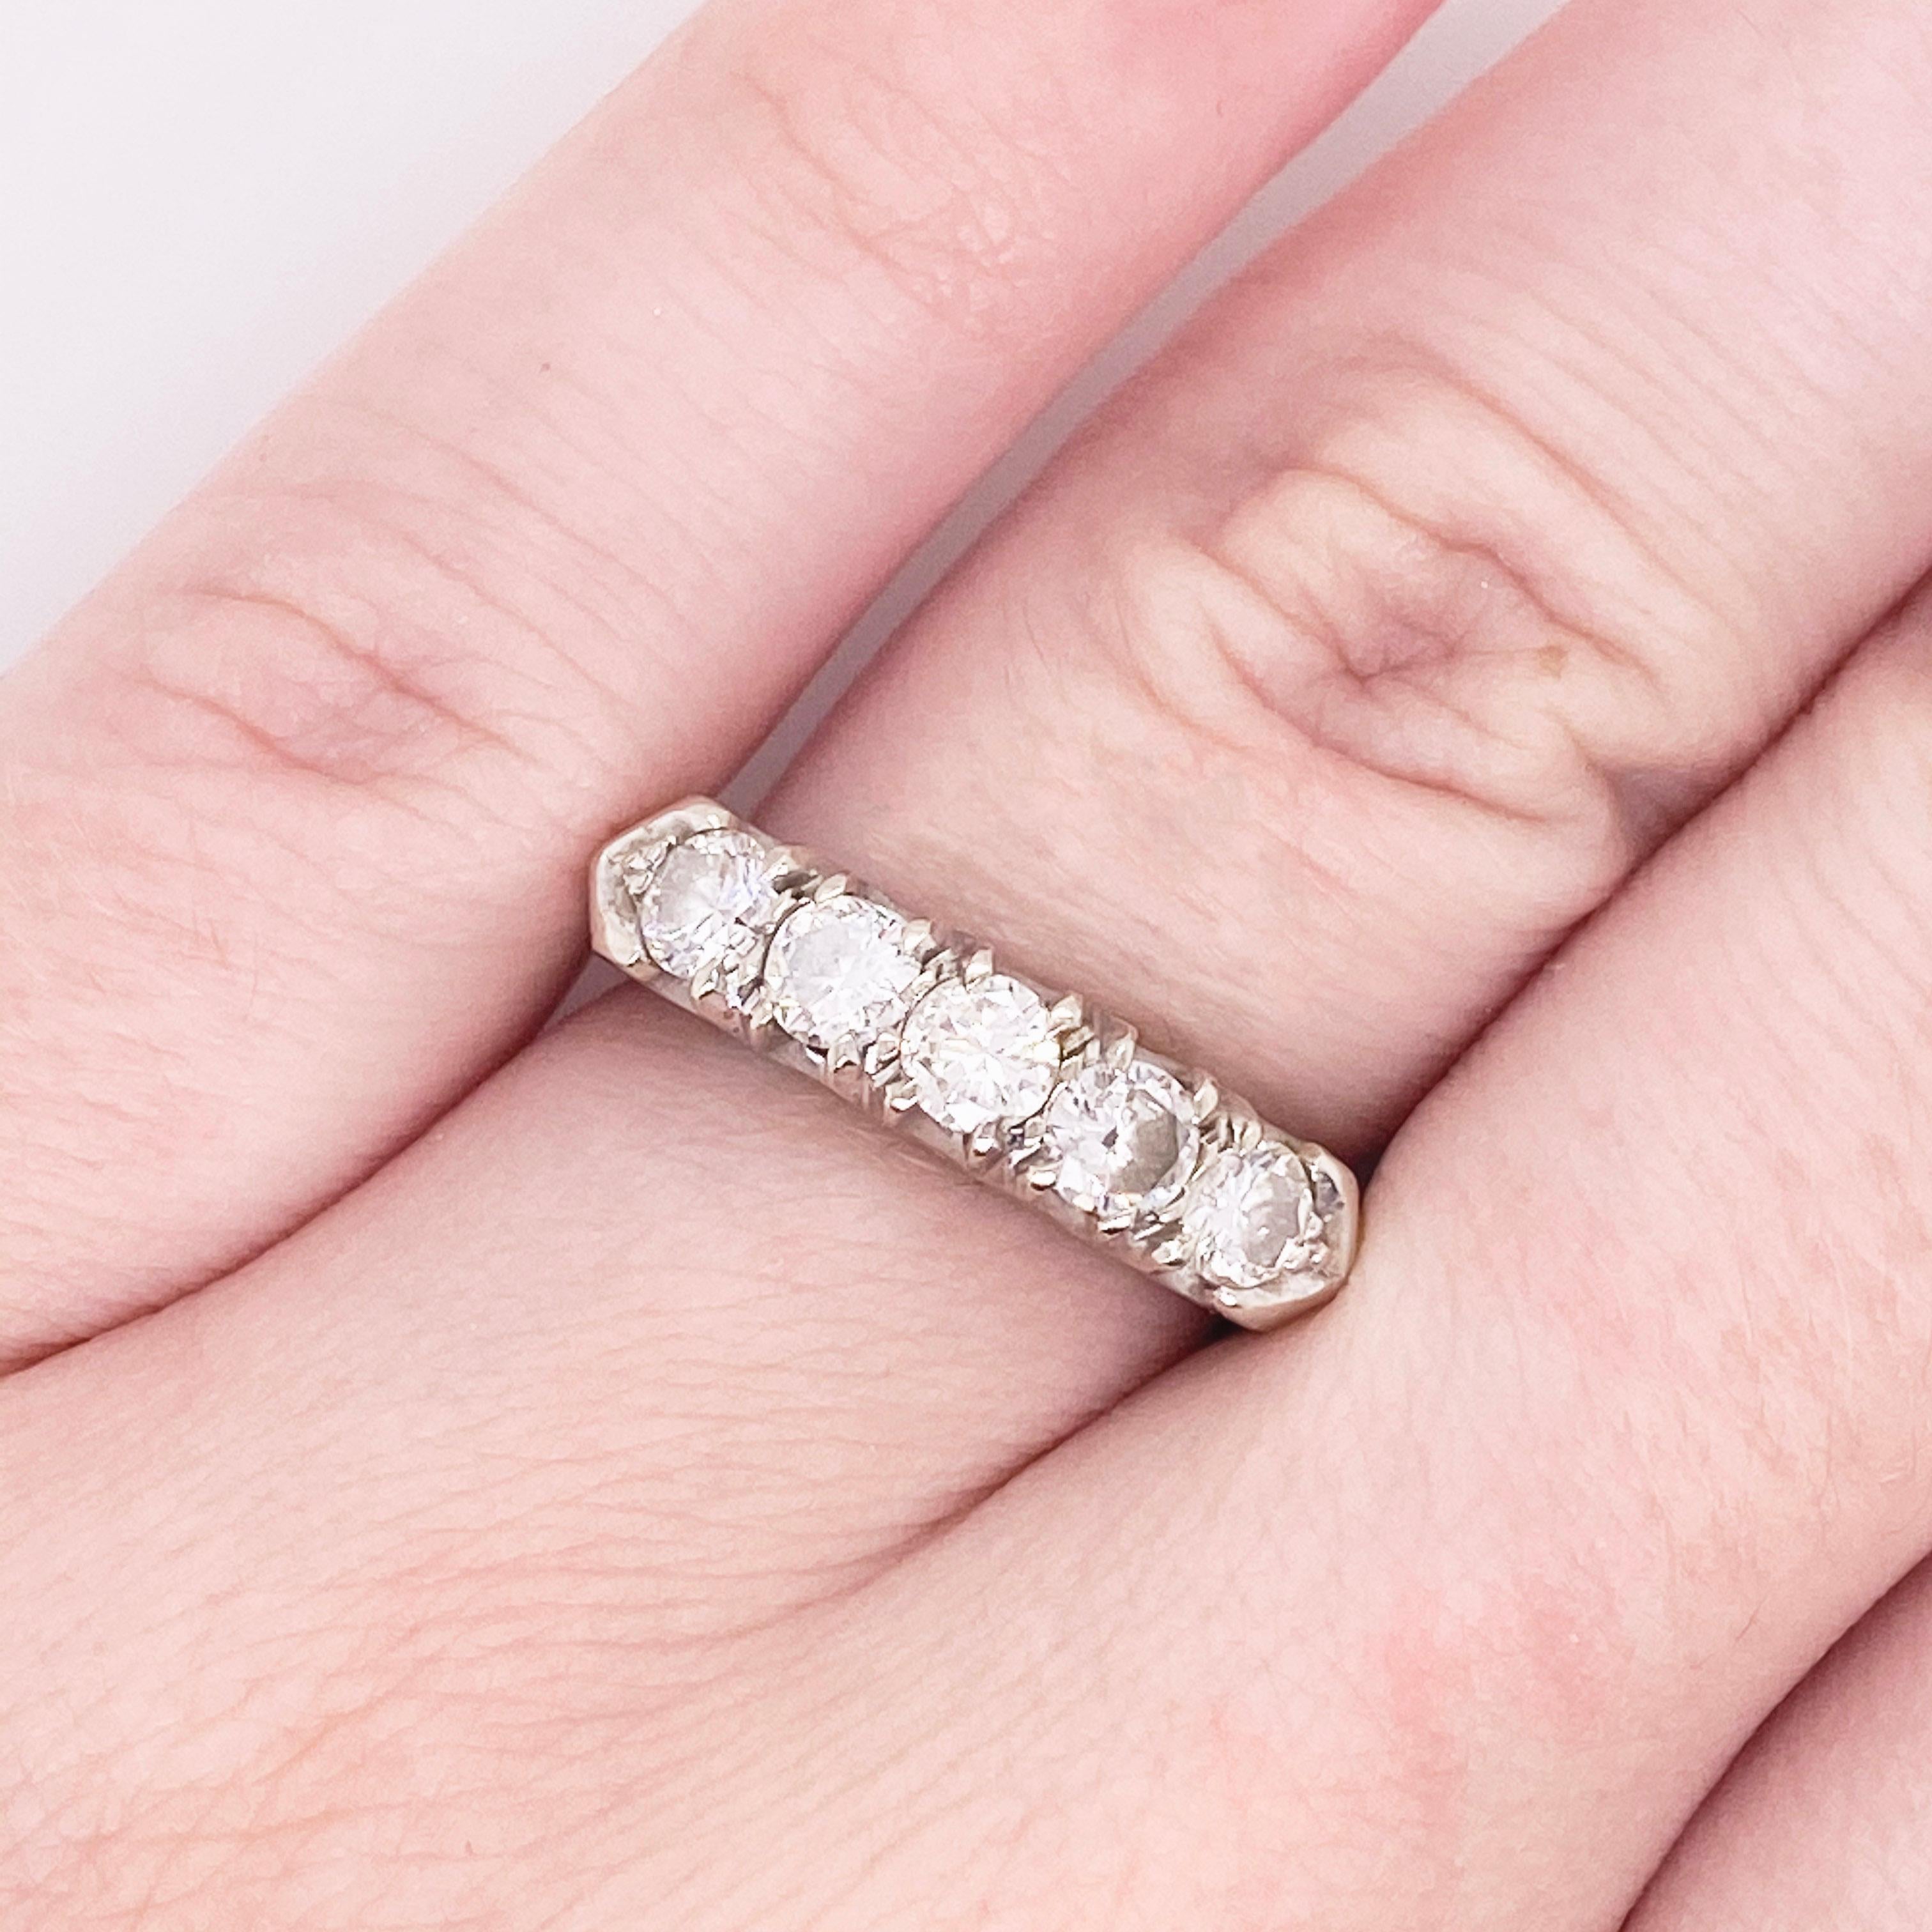 This stunningly beautiful diamond band ring would make anyone thrilled to receive it!  These brilliant diamonds set in polished 14k white gold provide a look that is very modern and classic at the same time! This ring is very fashionable and can add